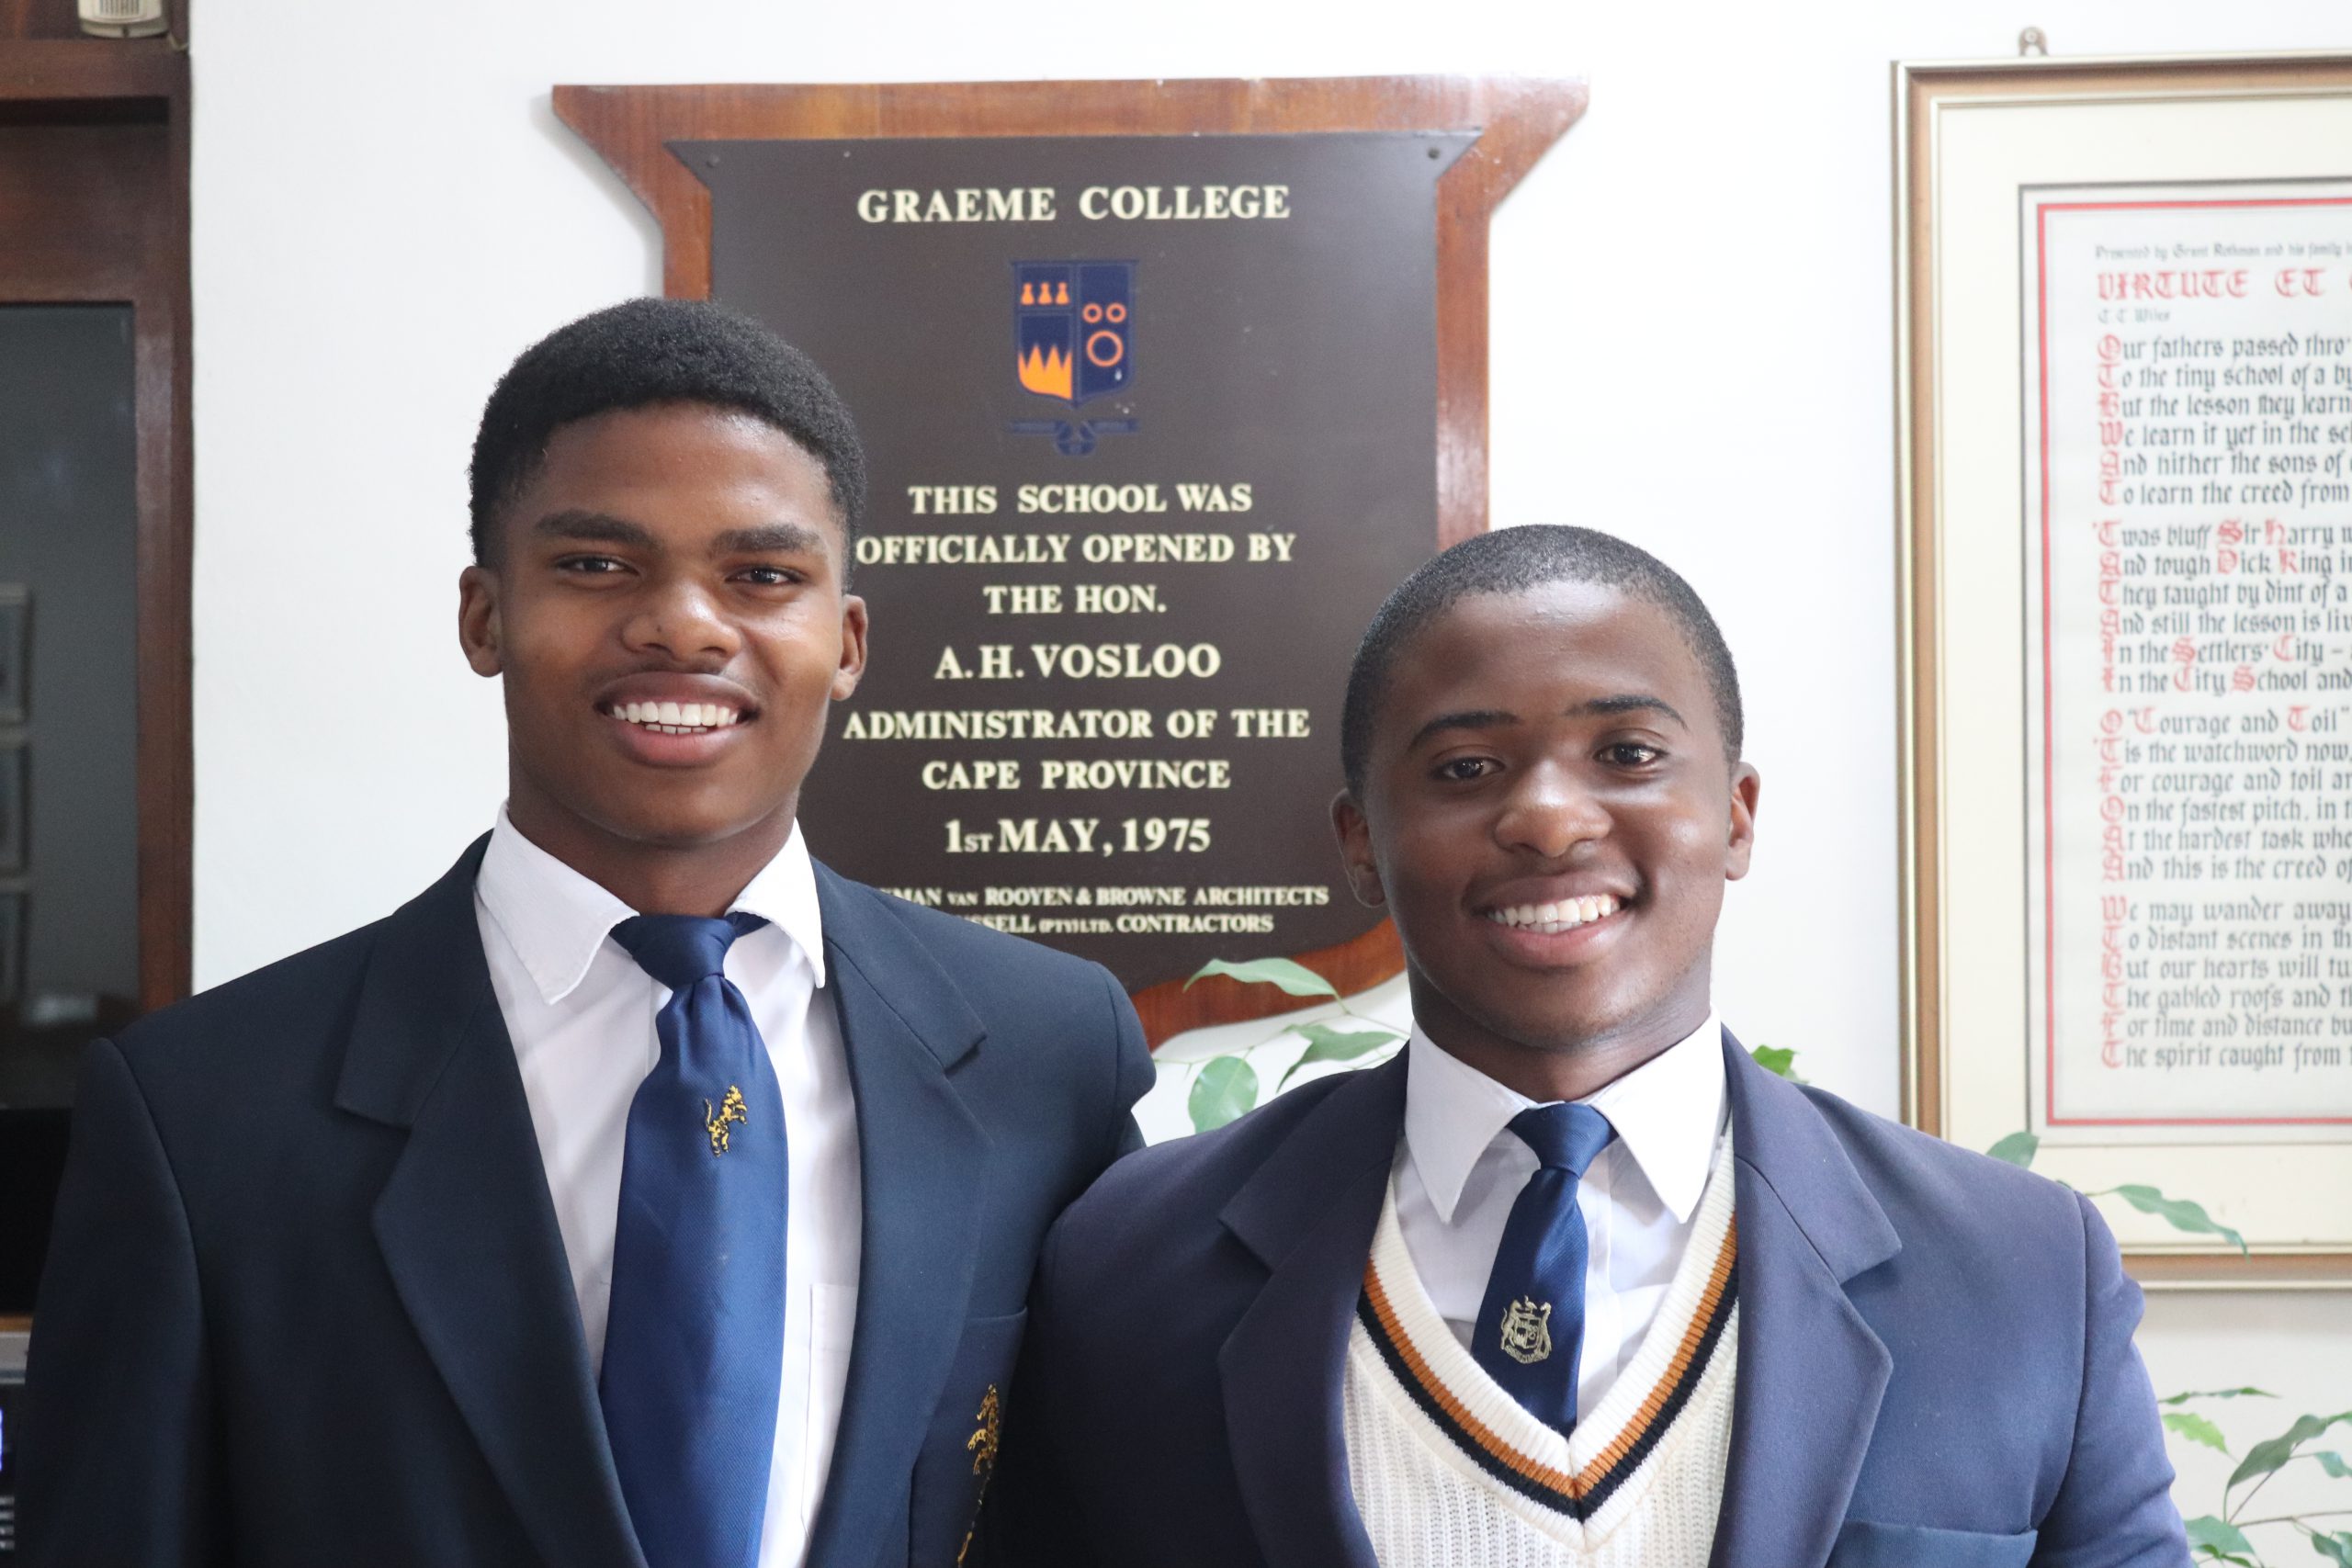 Marcus Williams ( left) Vice-Captain of Graeme College First team rugby. Fumani Baloyi ( Right) Captain of the Graeme College first team.